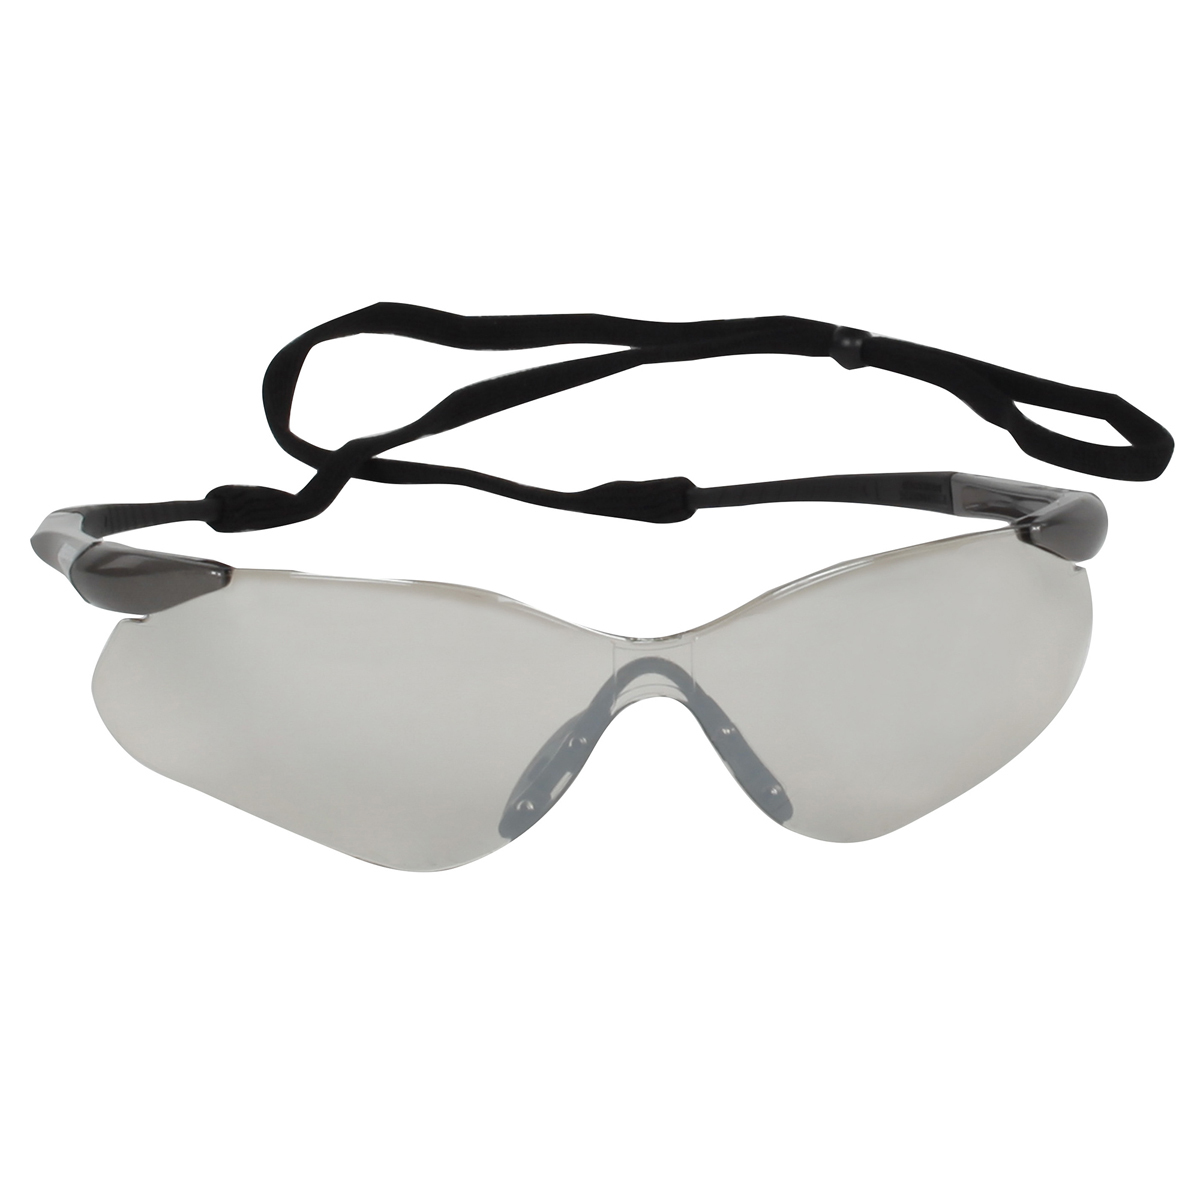 Kimberly-Clark Professional* KleenGuard™ Nemesis* VL Gray Safety Glasses With Clear Indoor/Outdoor Hard Coat Lens (Availability